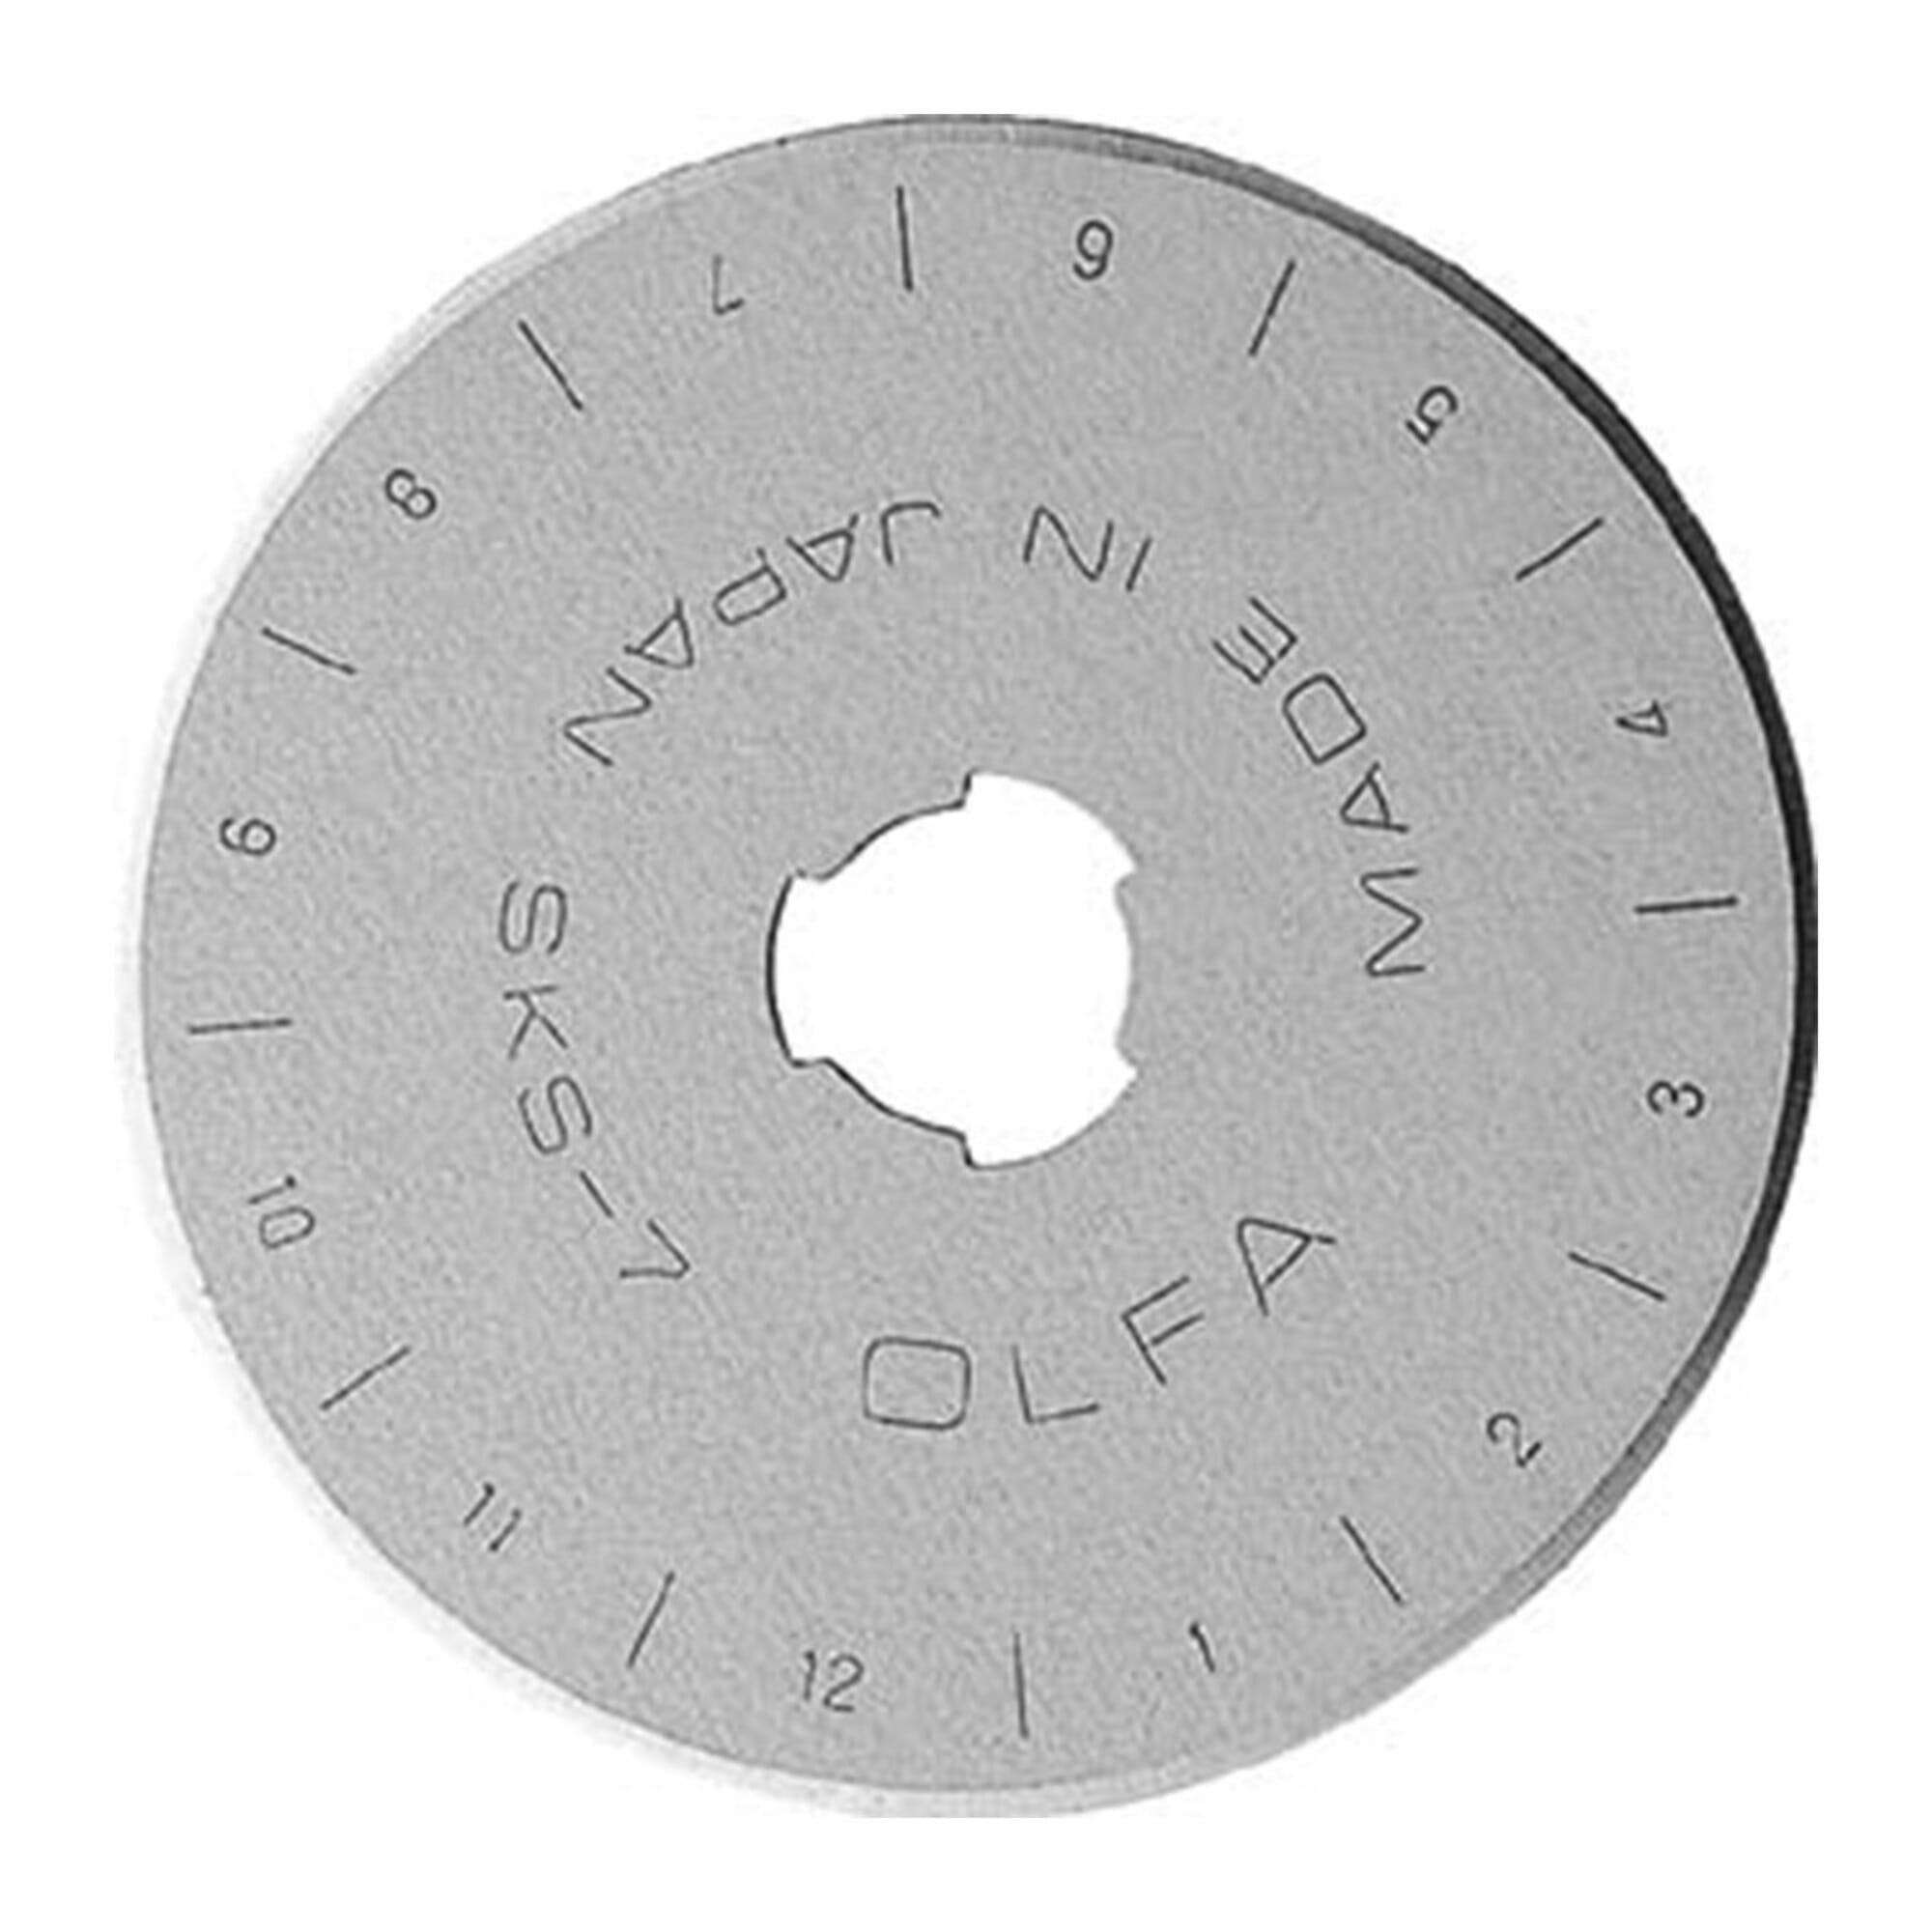  45mm Rotary Cutter Replacement Blades,Rotary Blades